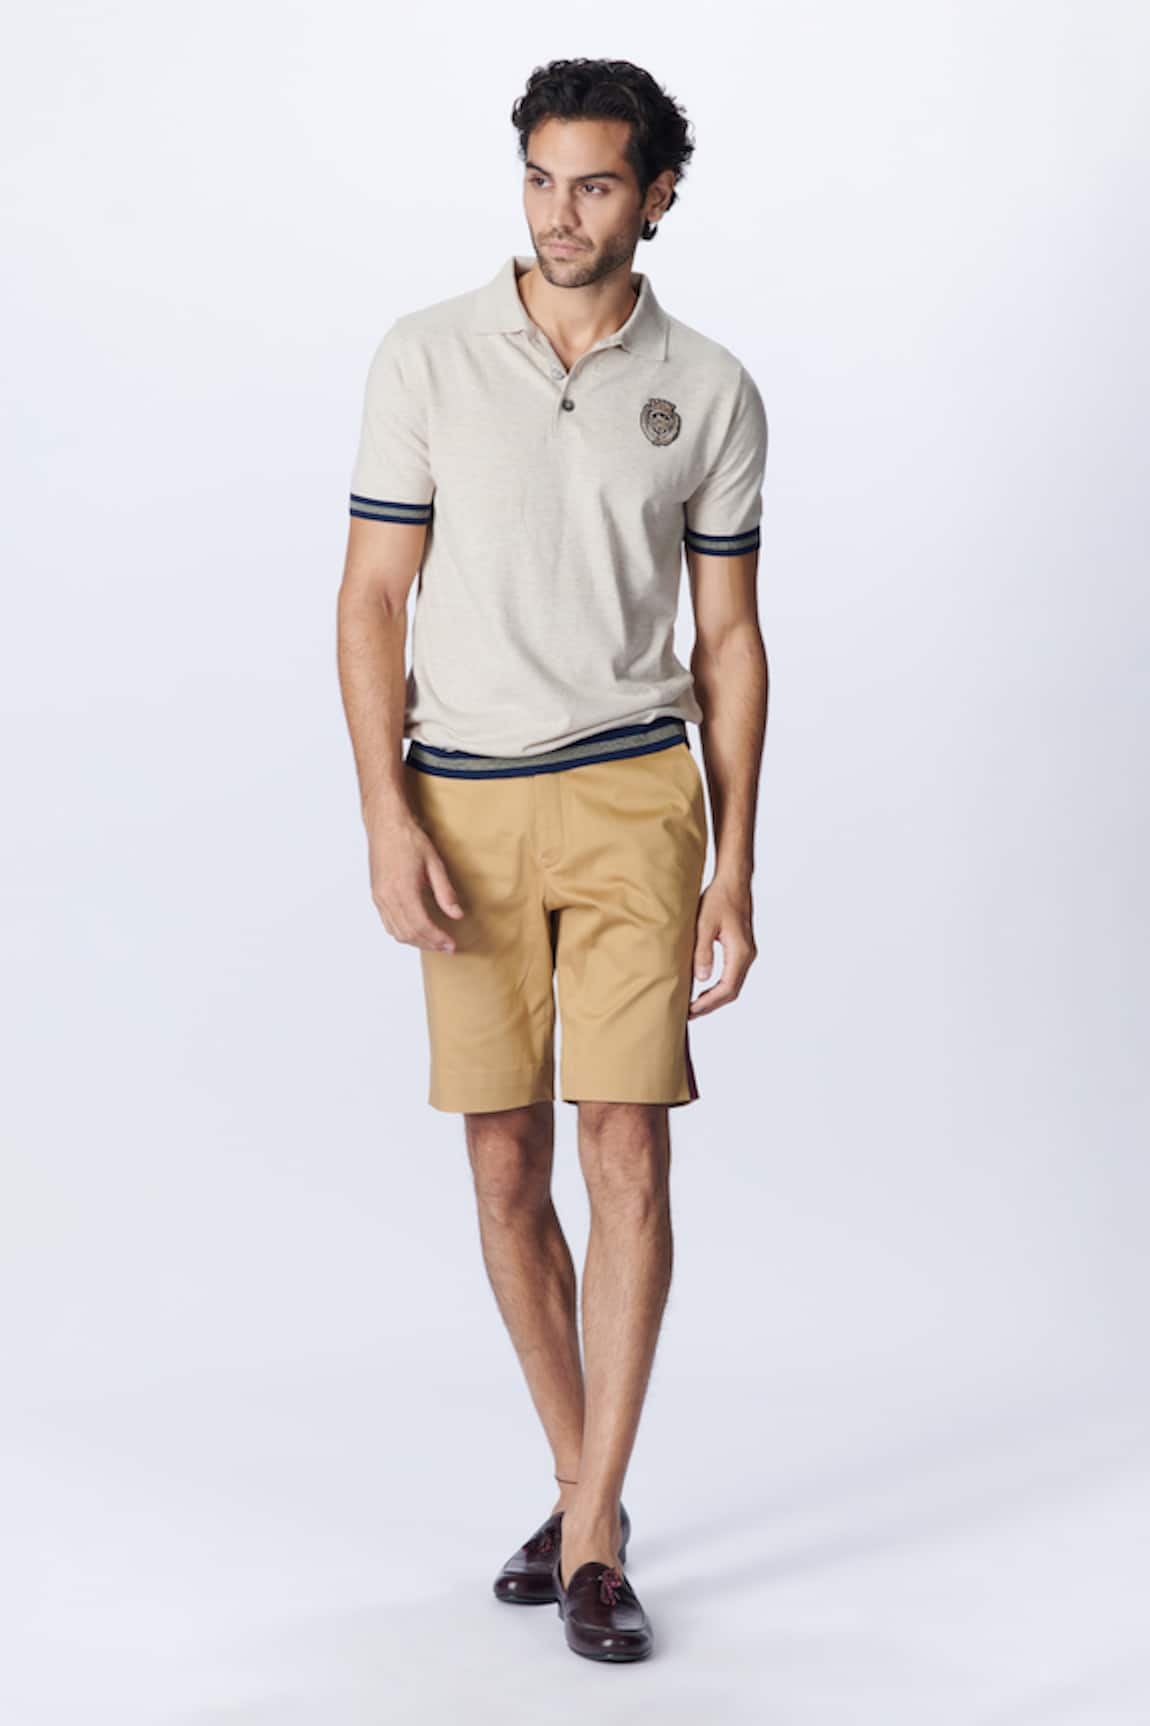 S&N by Shantnu Nikhil Placement Embroidered Shorts